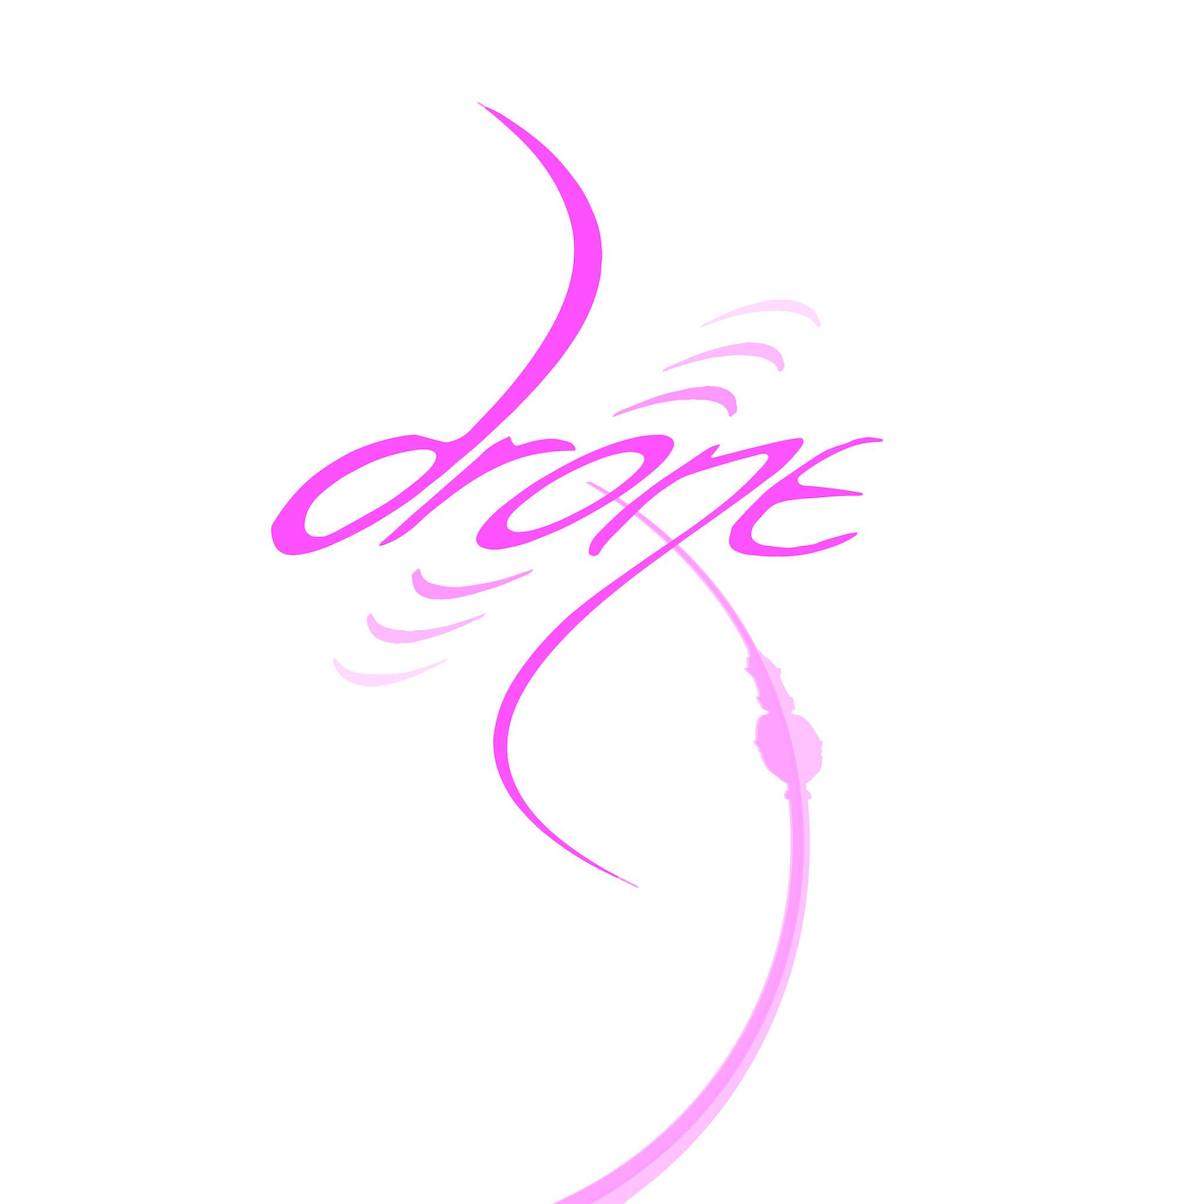 Curved magenta digital art with the text 'dr(((o)))ne'